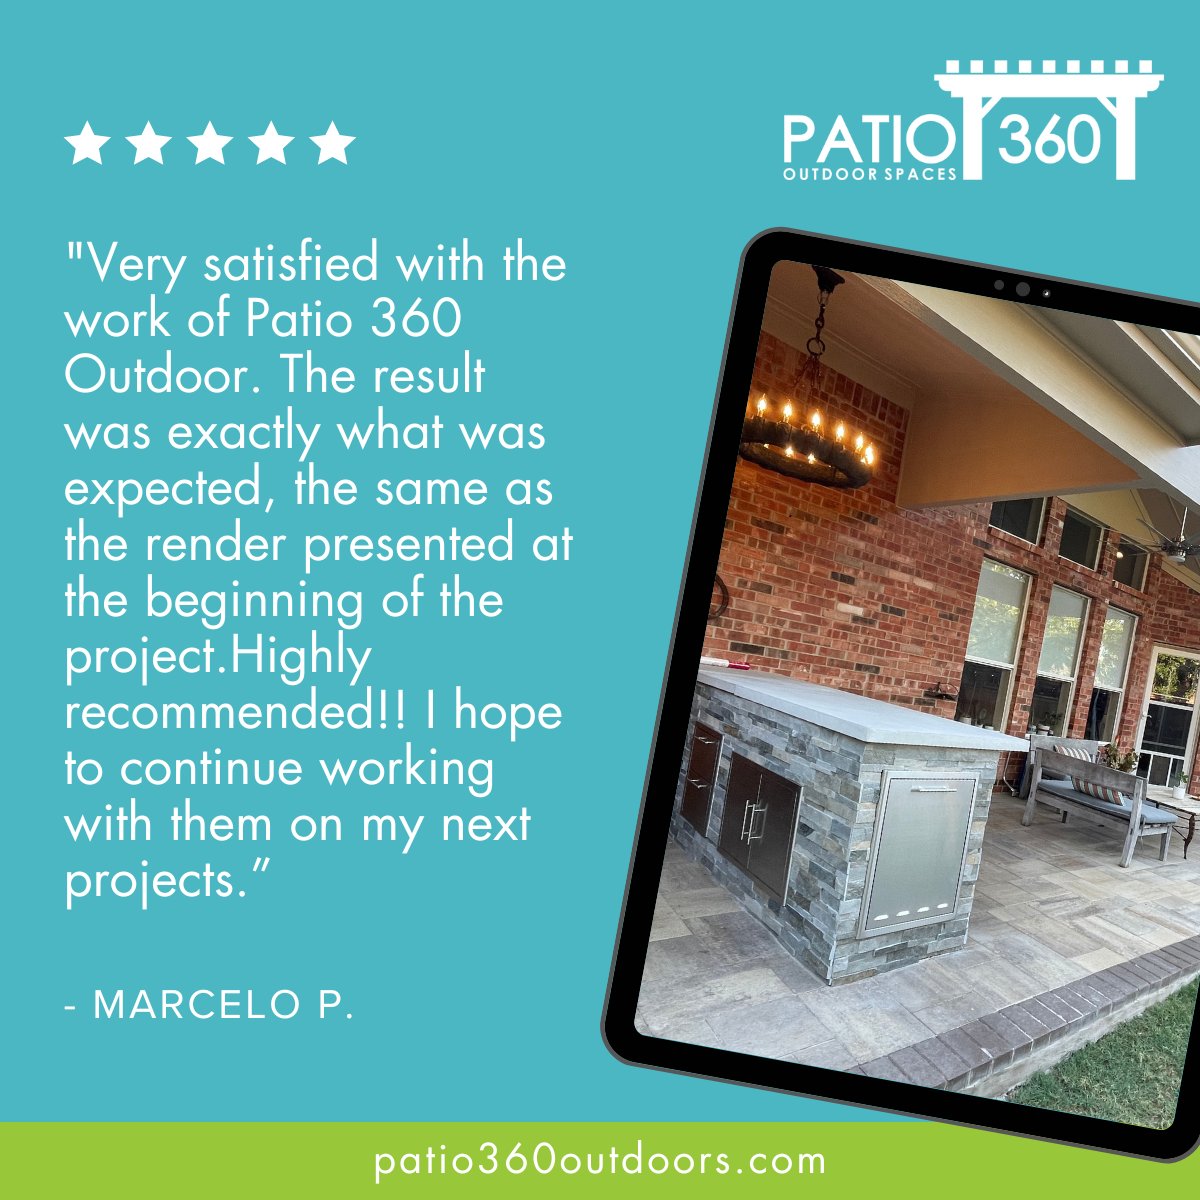 Contact us today and let's elevate your outdoor living experience. patio360outdoors.com
#Patio360Outdoors #CustomPatio #OutdoorLiving #CoveredPatio #Pergola #OutdoorKitchen #Patio